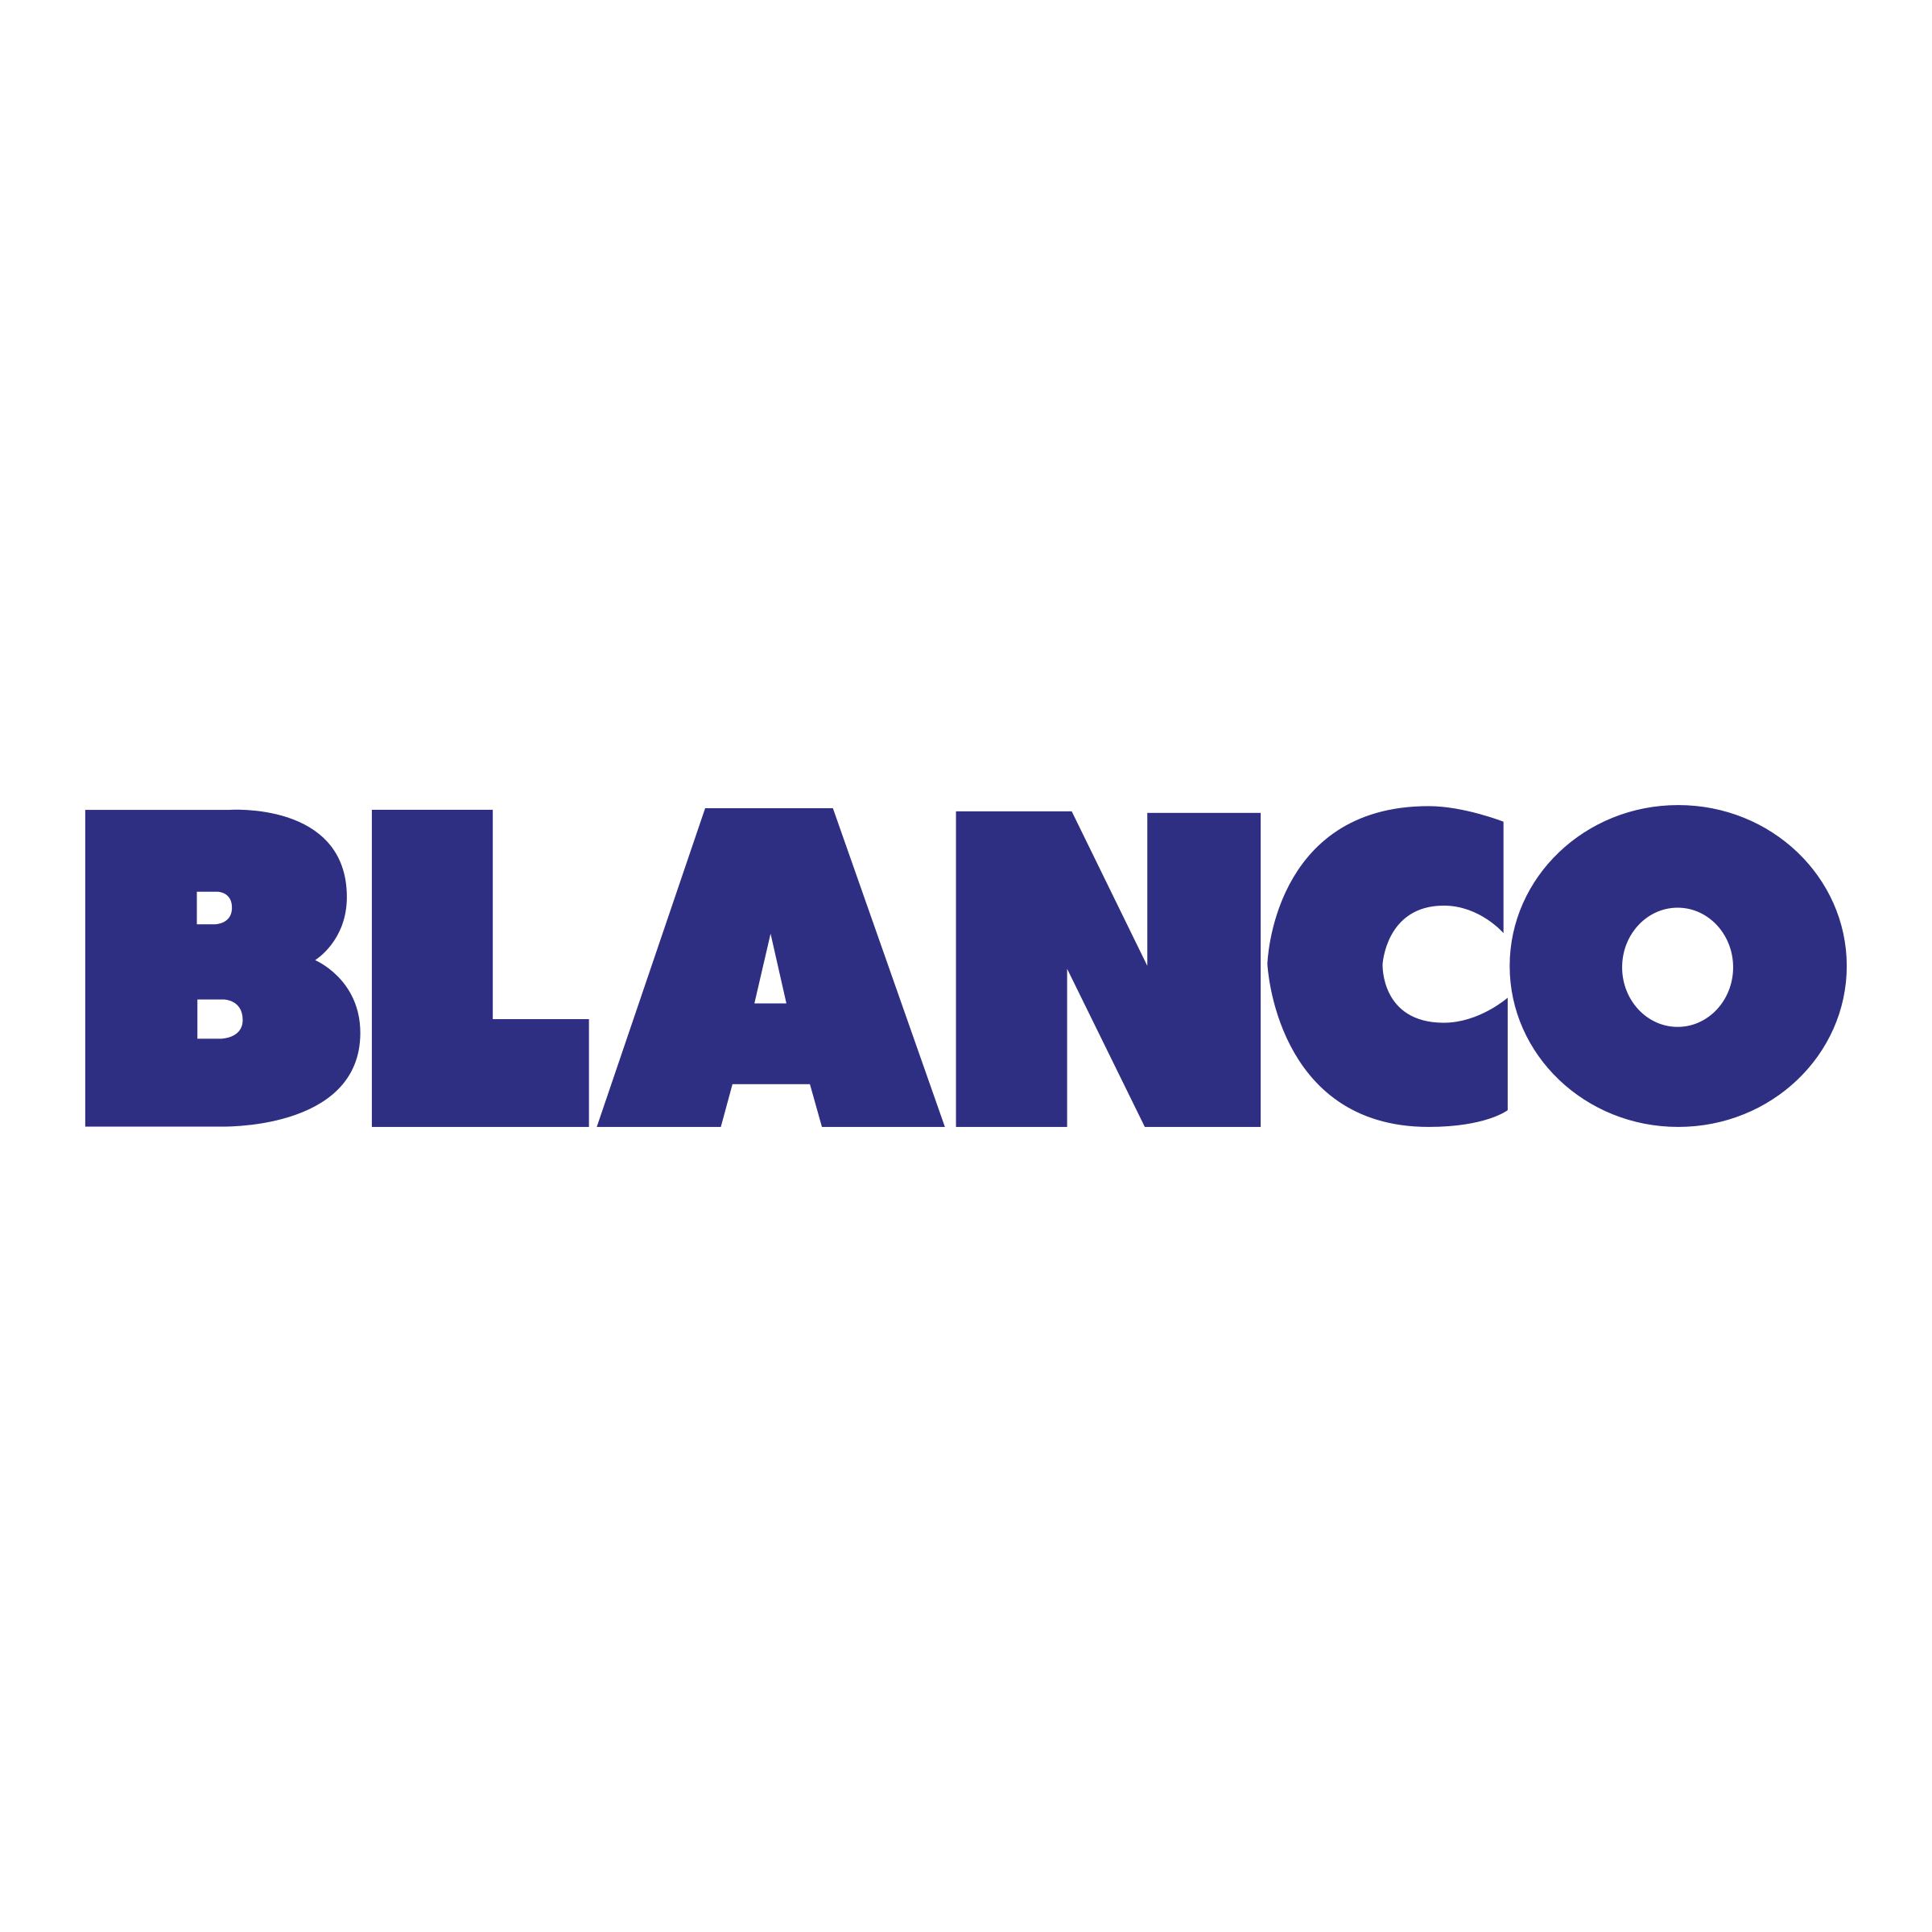 Bespoke Designs - blanco logo png transparent - frequently asked questions